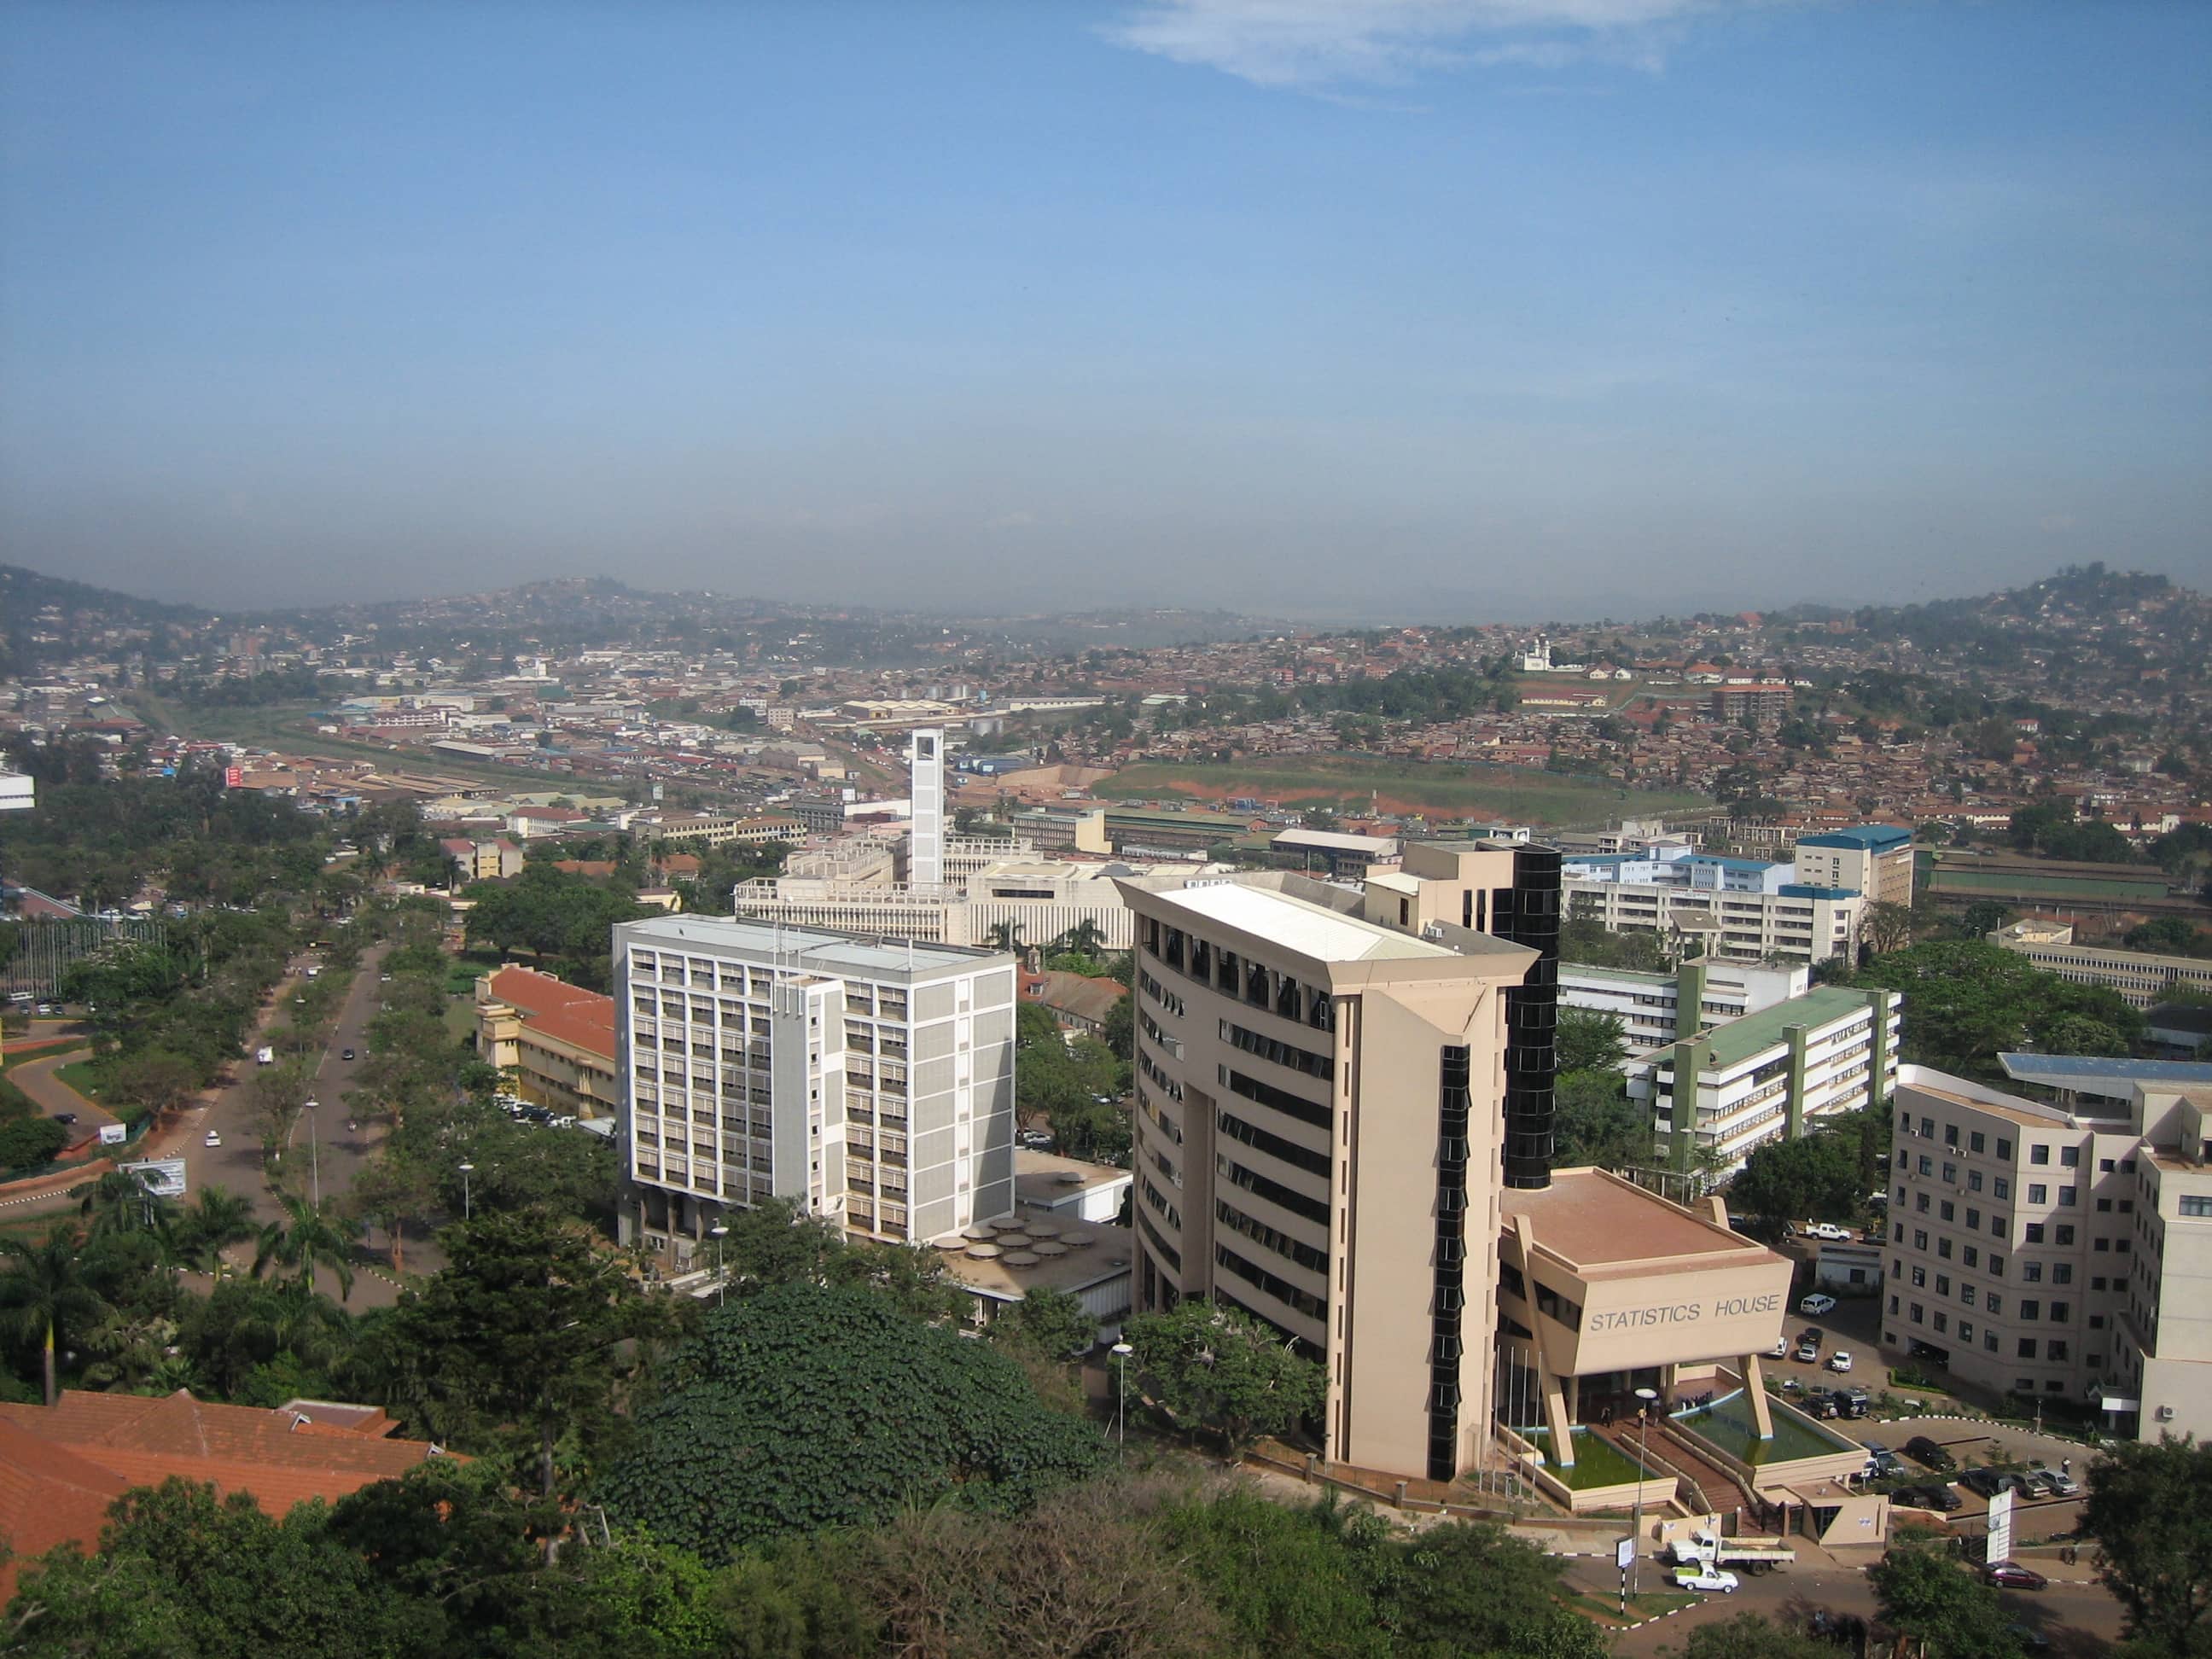 A view of the Ugandan Parliament and Statistics House, Kampala, Pete Price/Flickr/http://bit.ly/1hYHpKw